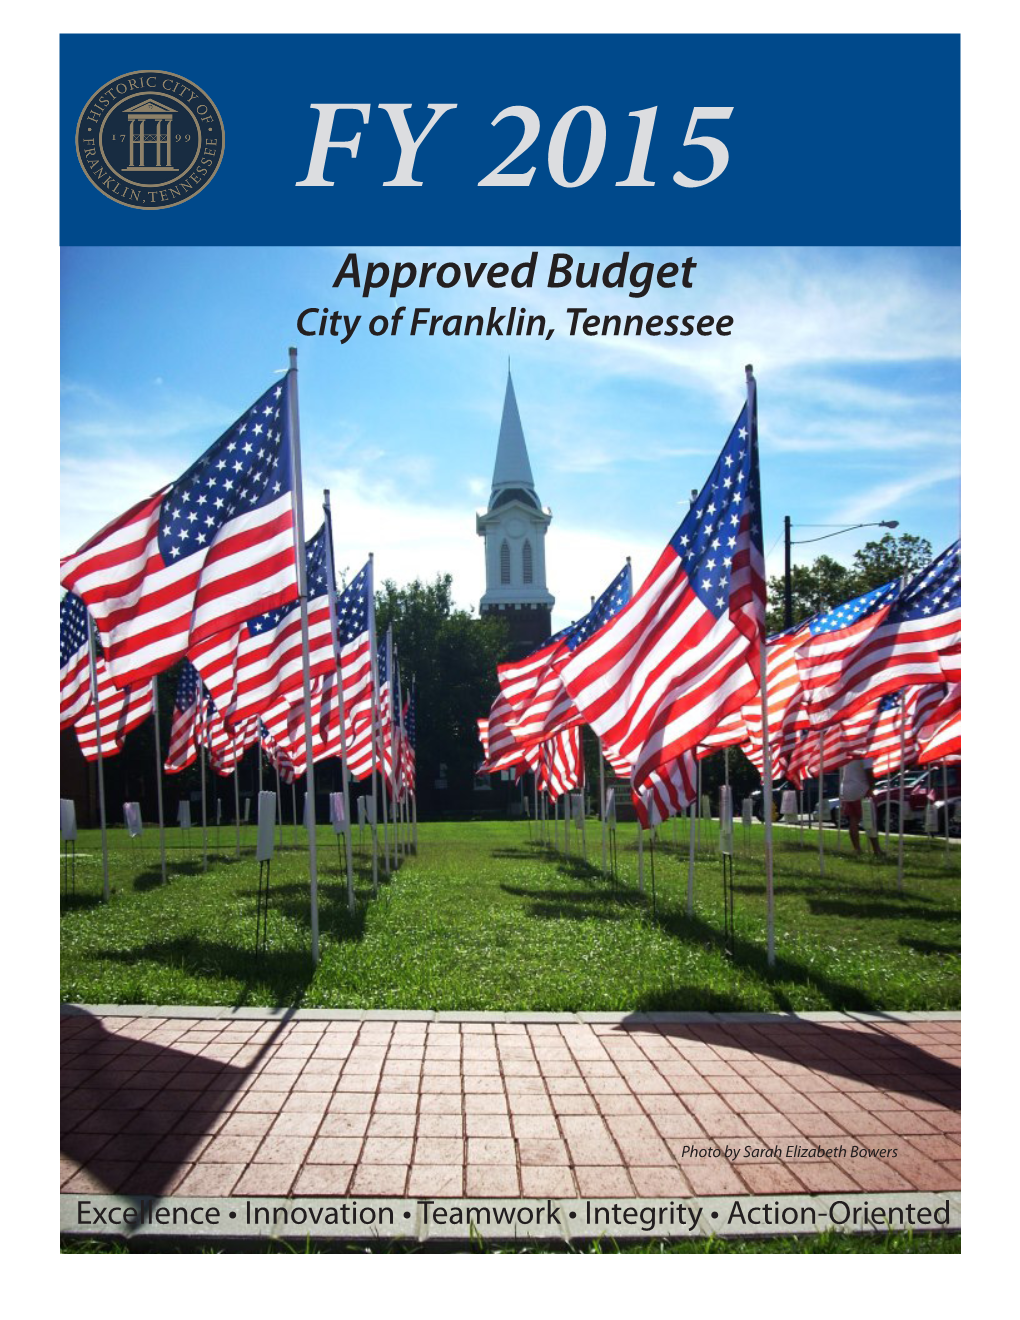 Approved Budget City of Franklin, Tennessee